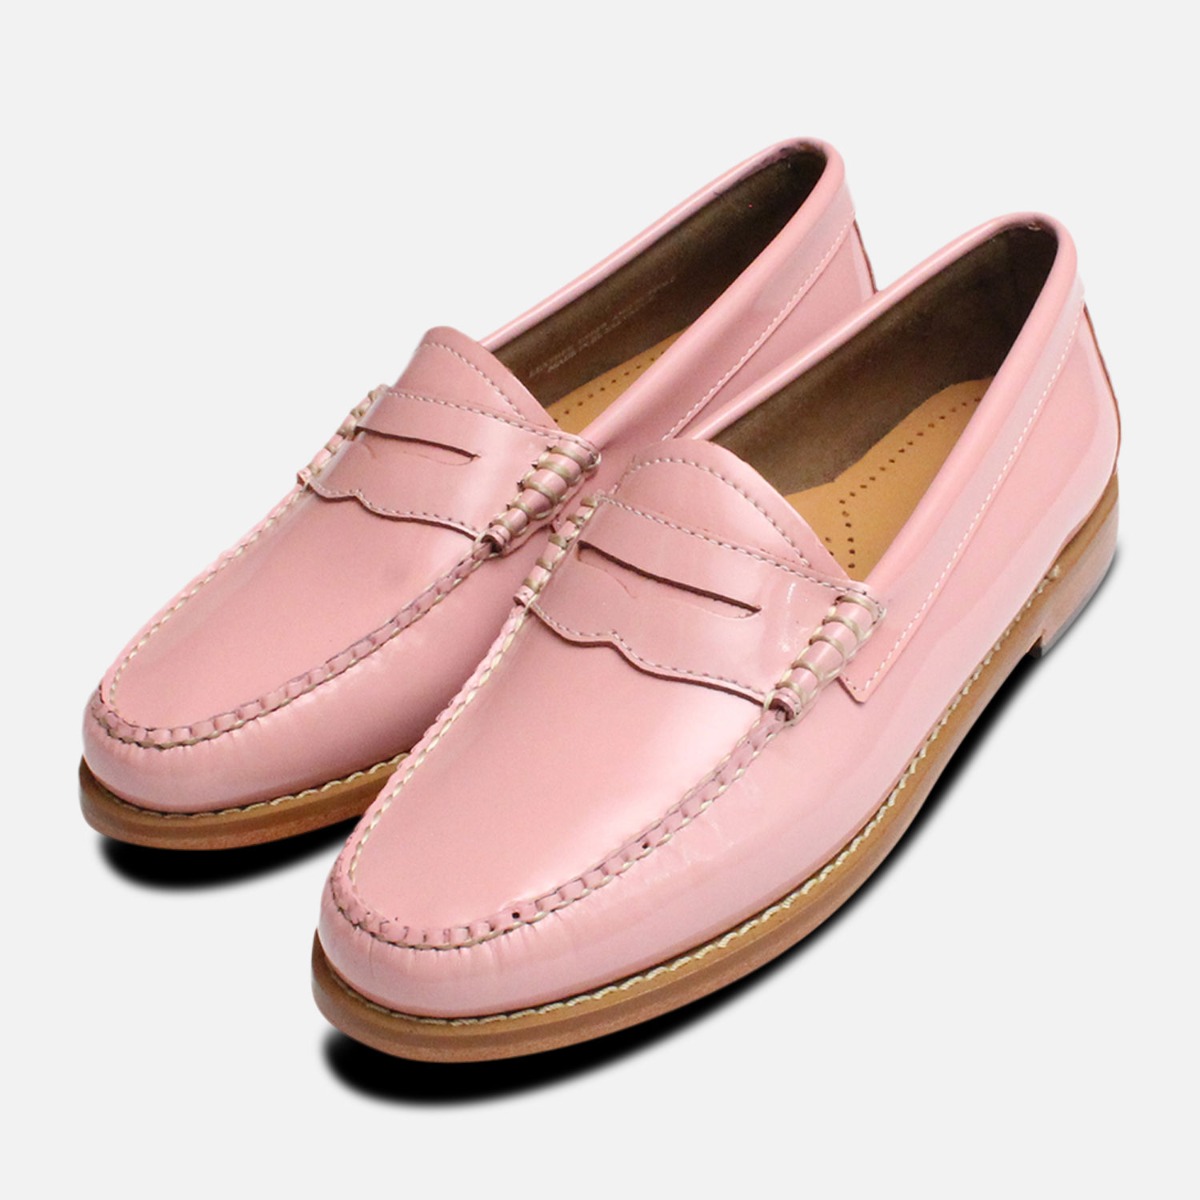 bass penny loafers canada